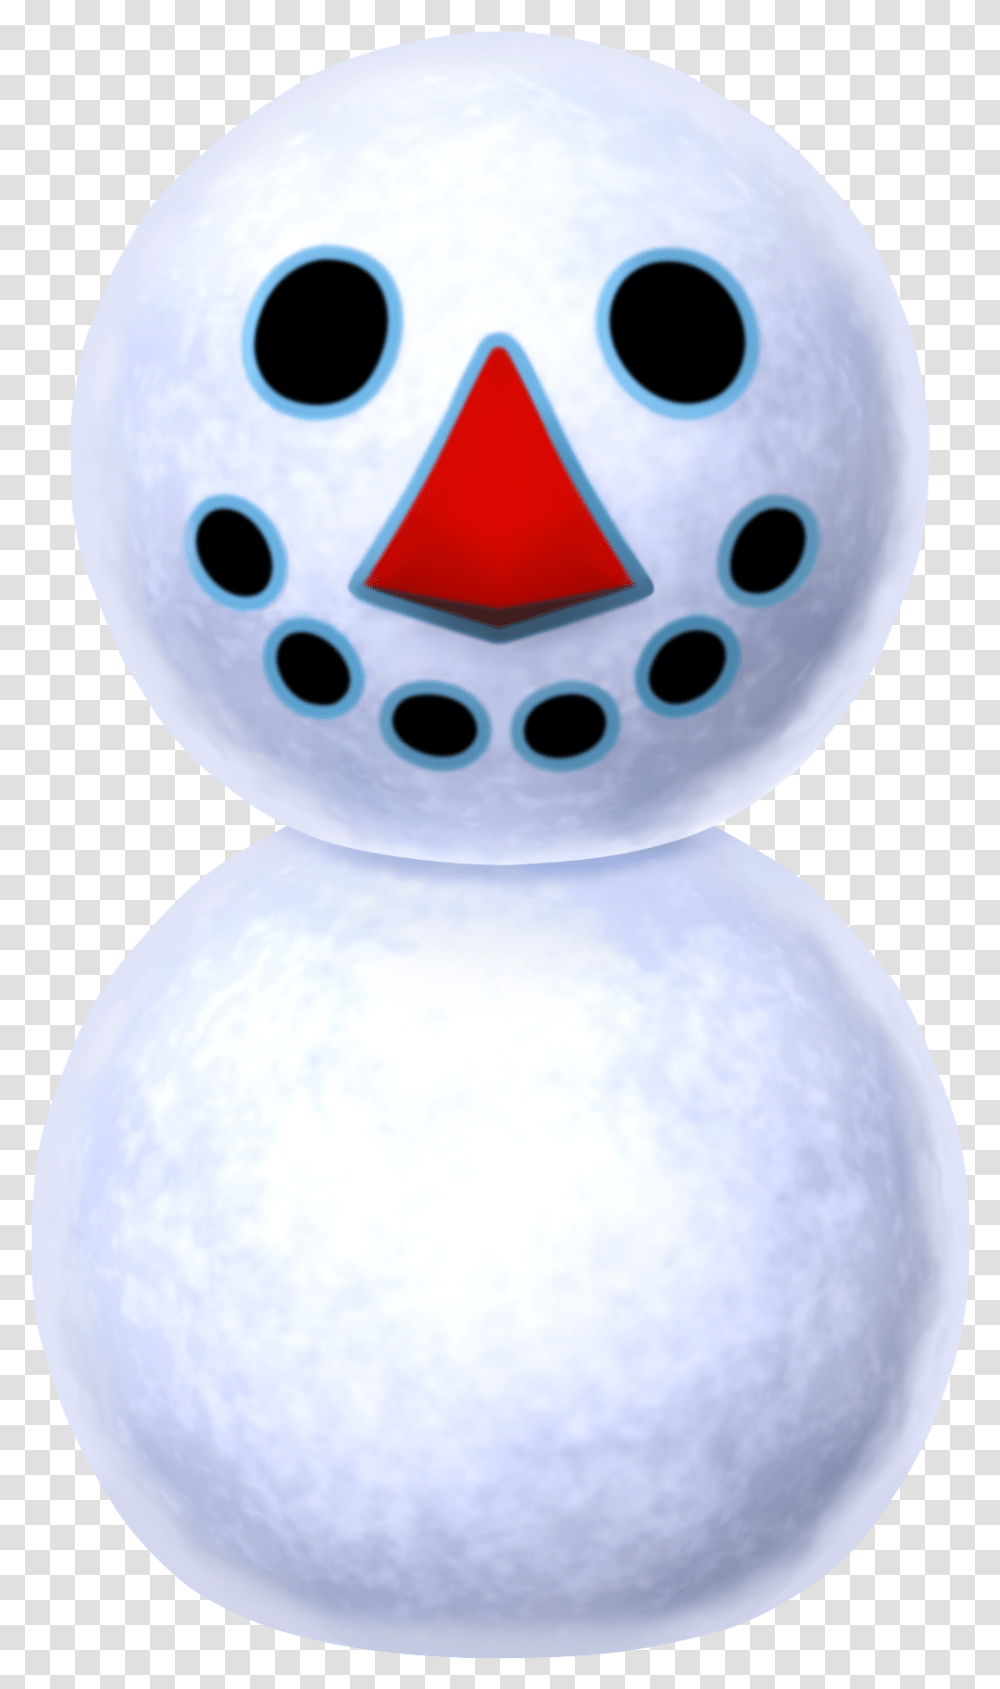 Download Hd New Leaf Images Snowman Wallpaper And Animal Crossing New Leaf Snowman, Winter, Outdoors, Nature, Robot Transparent Png